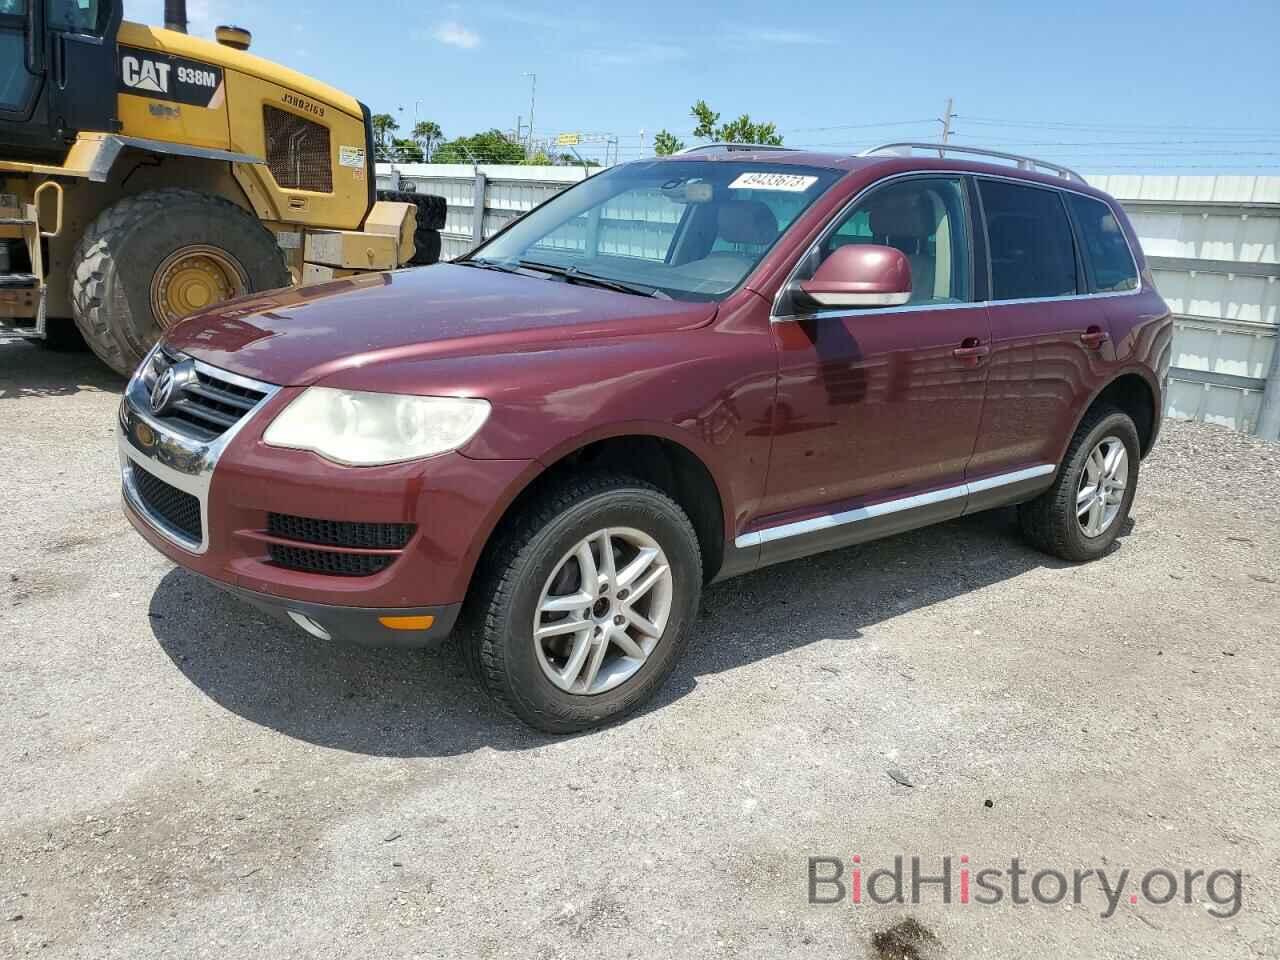 Photo WVGFK7A90AD003190 - VOLKSWAGEN TOUAREG TD 2010